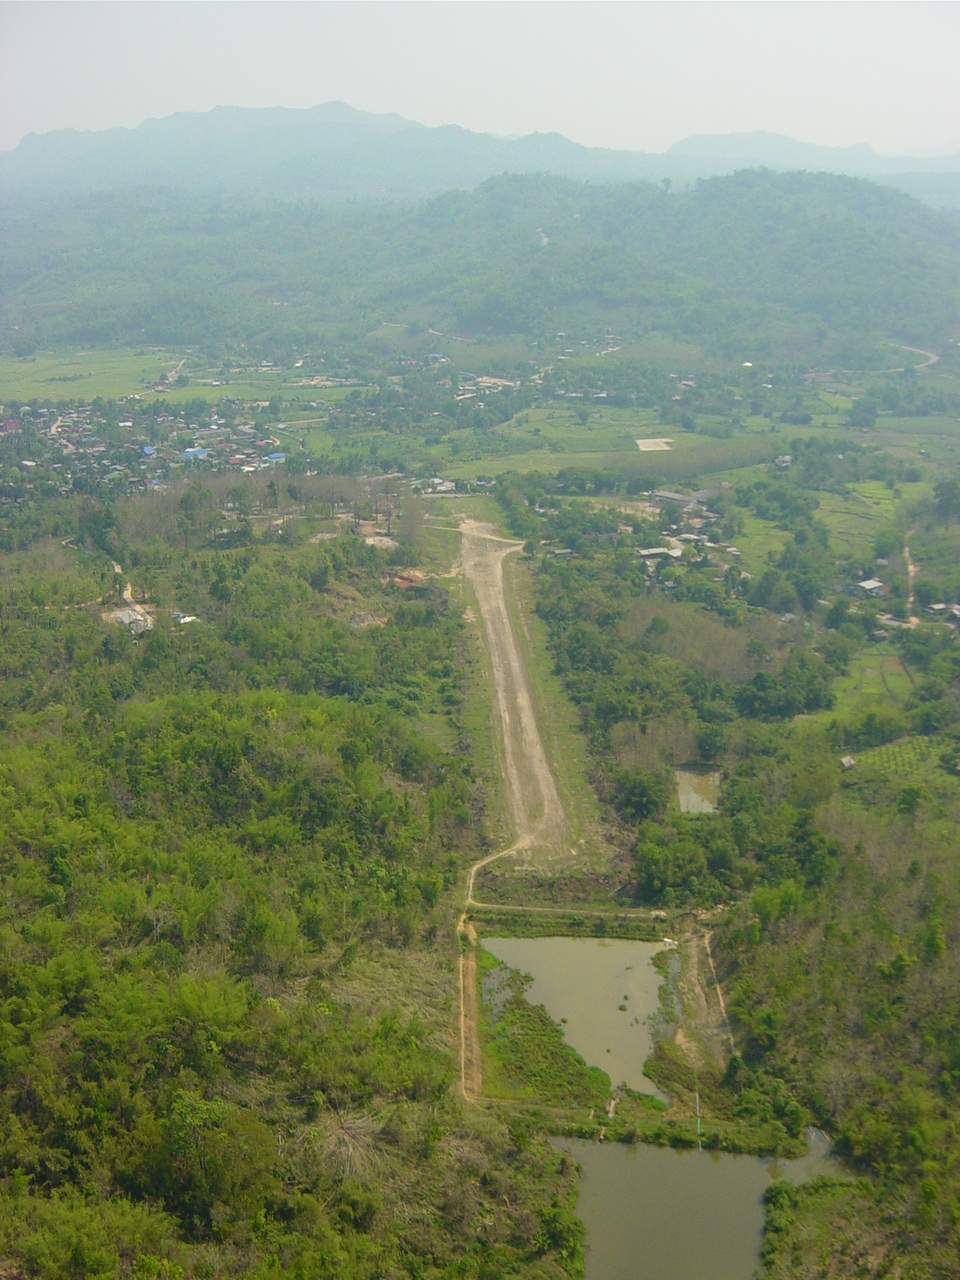 Umphang Runway 20 - for TAKEOFF (away from the mountain)